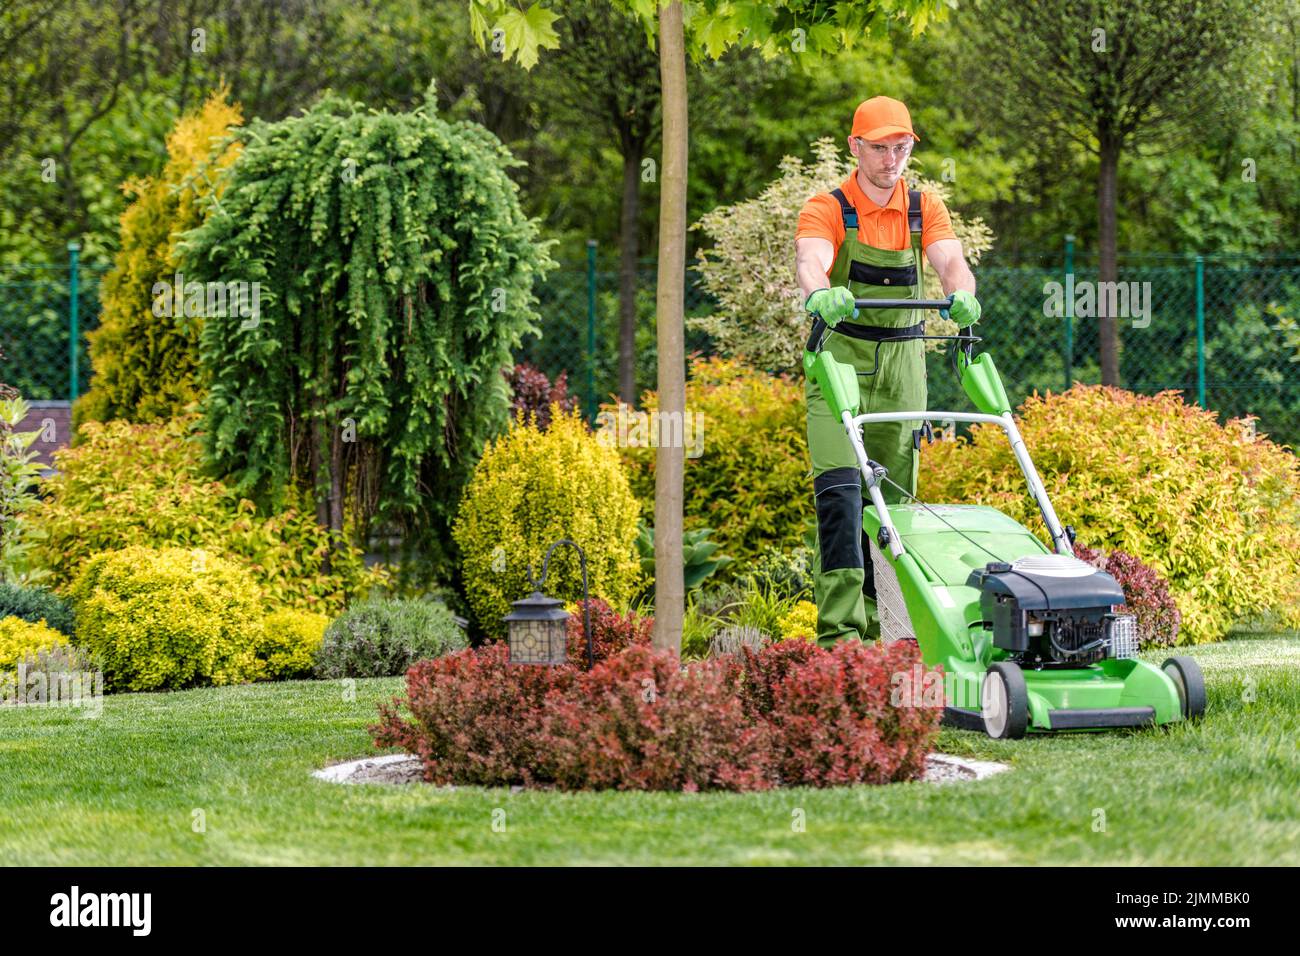 Caucasian Greenskeeper Trimming the Grass in His Client’s Backyard Garden with Electric Lawn Mower. Beautifully Landscaped Plants in the Background. G Stock Photo